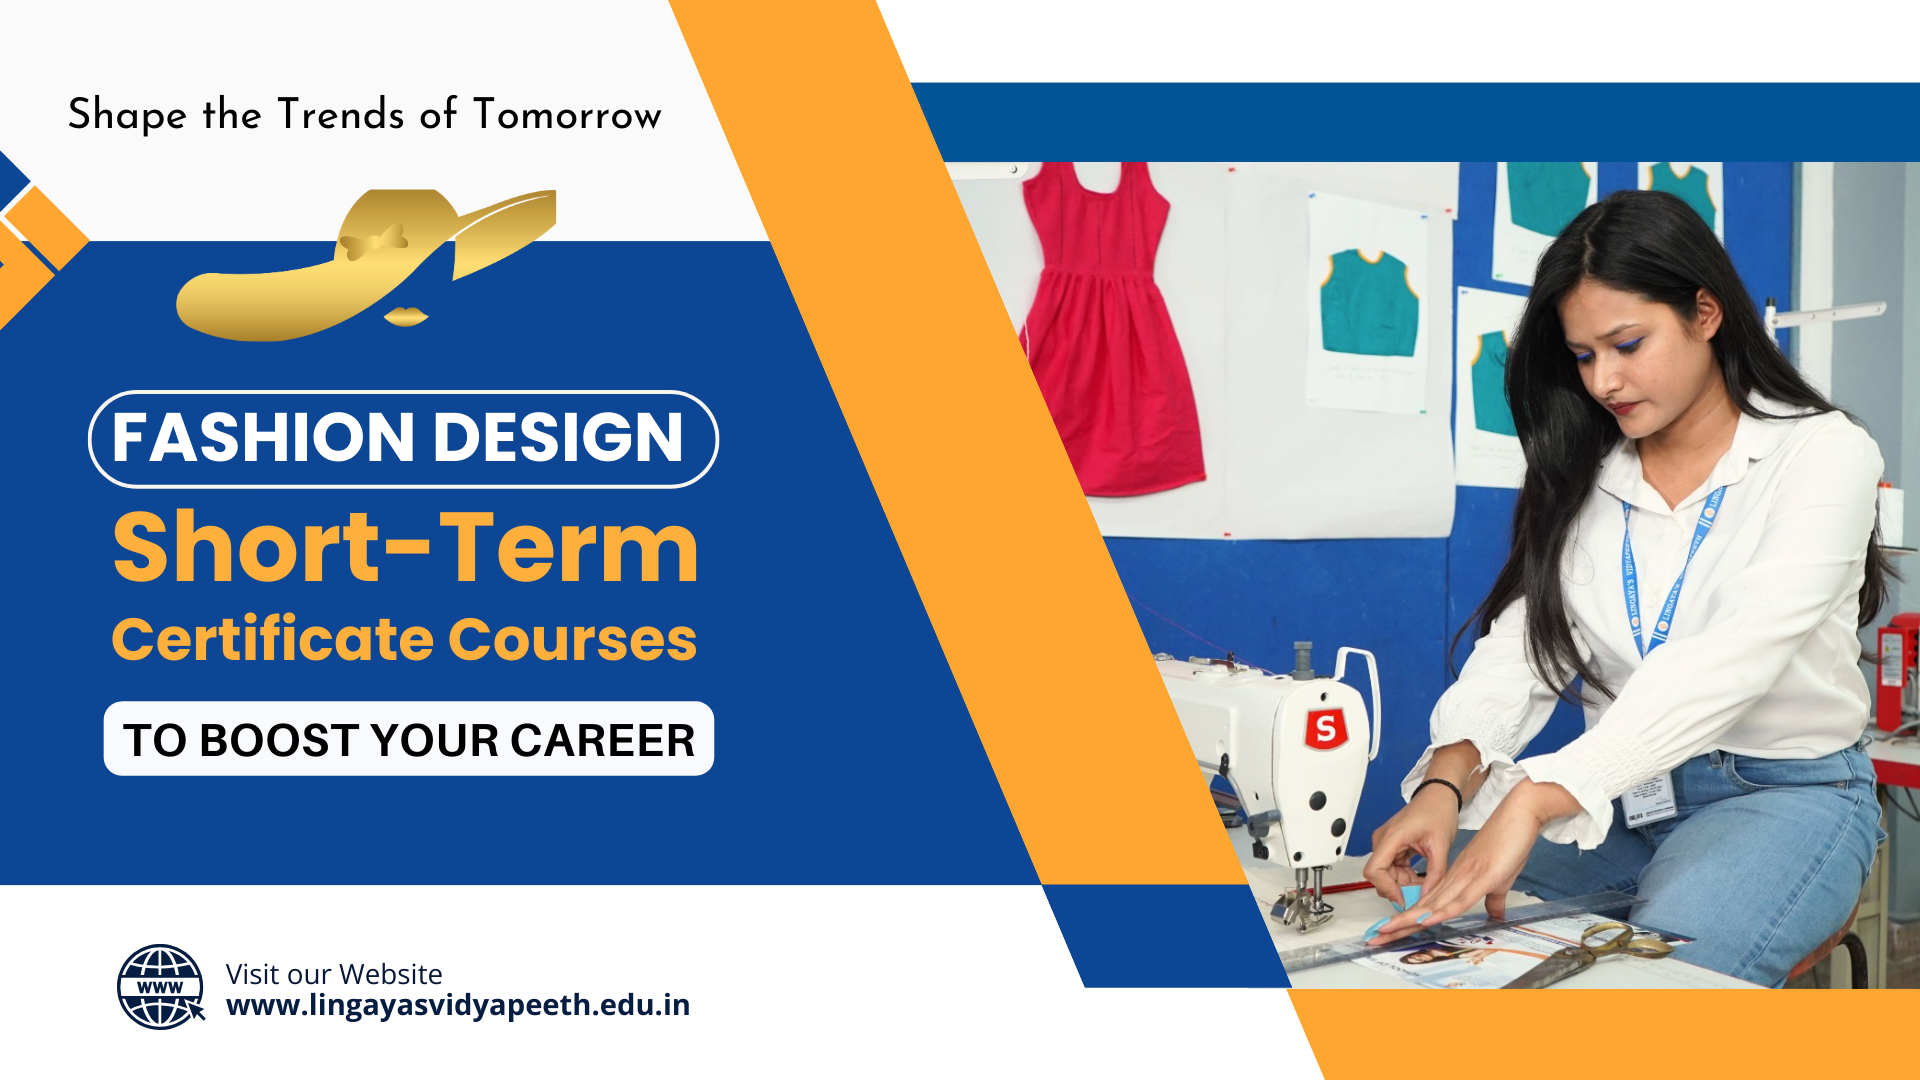 What are Some Great Short-Term Certificate Courses to Boost your Career in Fashion Design?